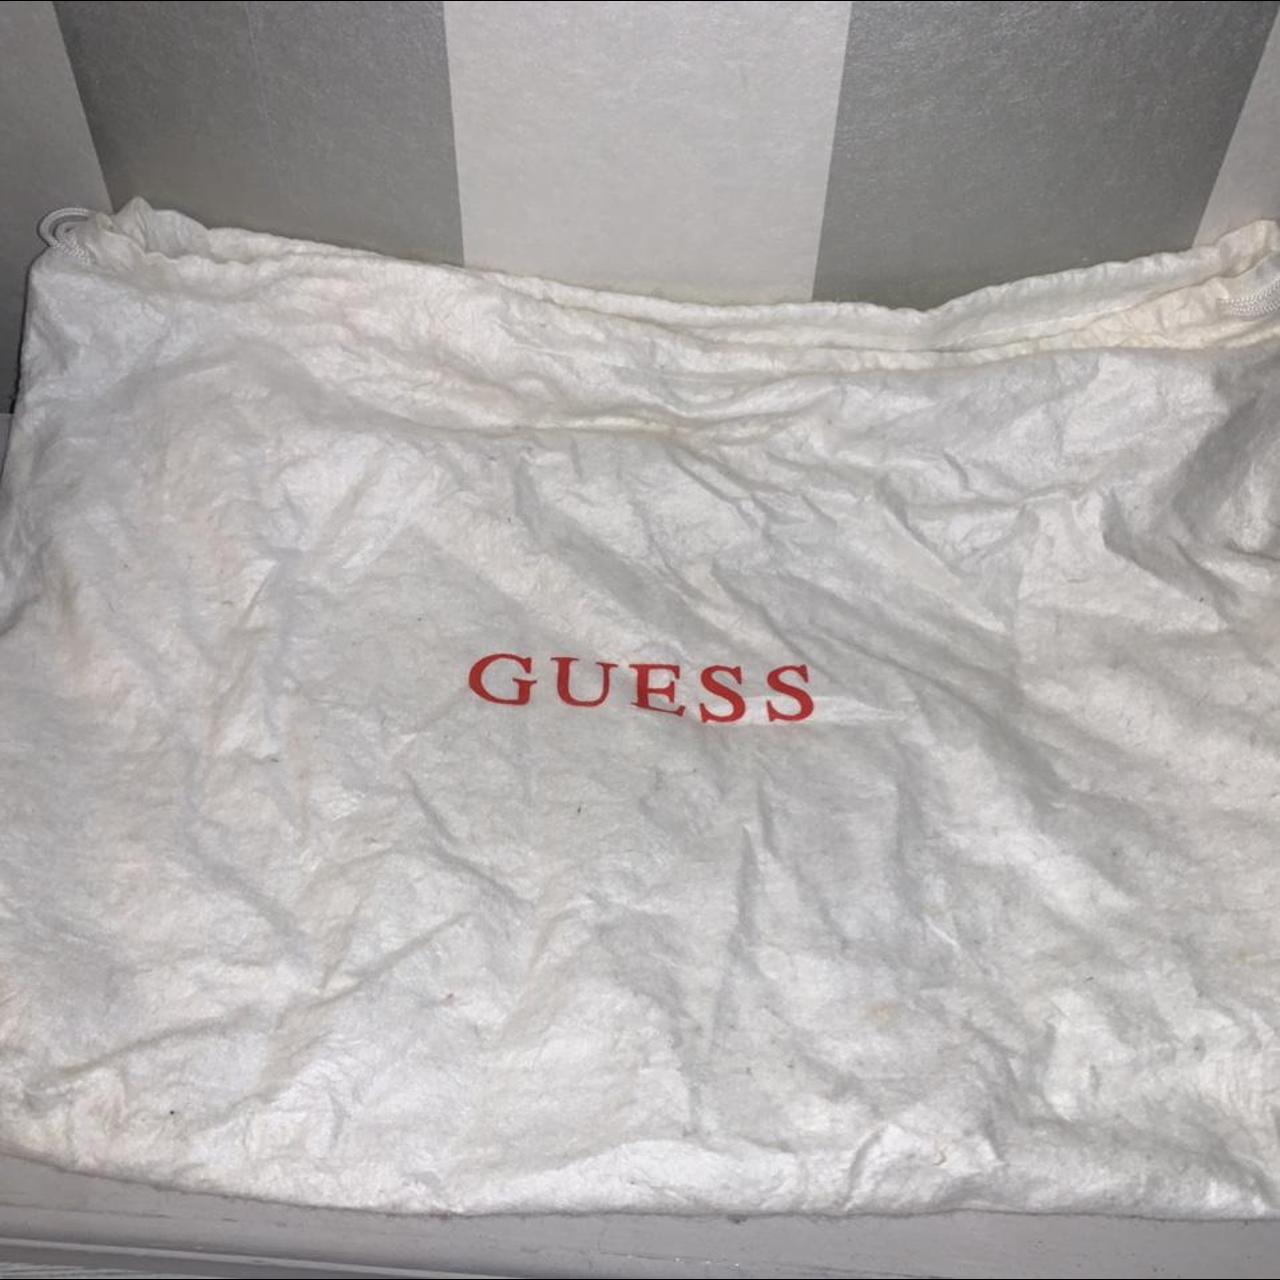 Product Image 4 - Guess vintage bag
Authentic comes with